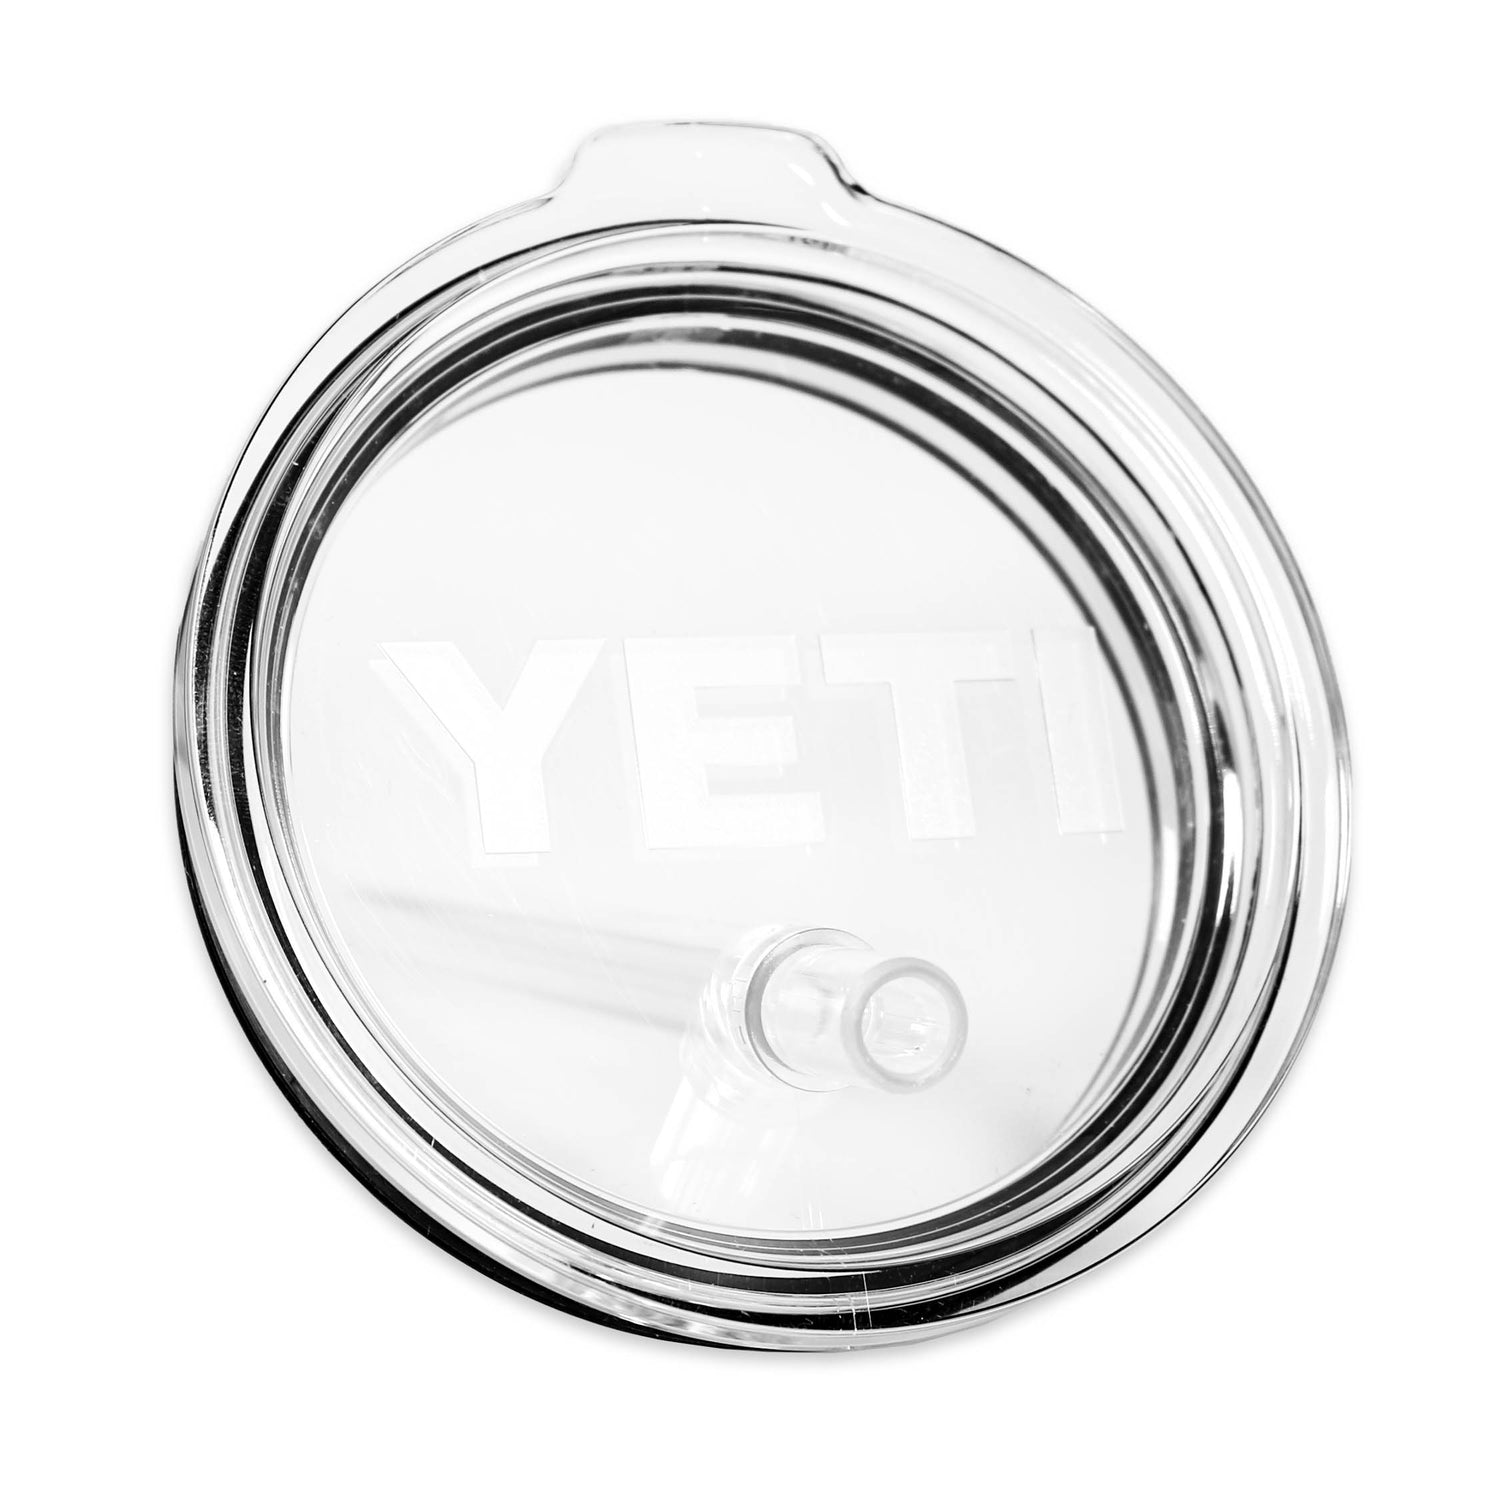 YETI Rambler 20 oz Replacement Lid with Straw